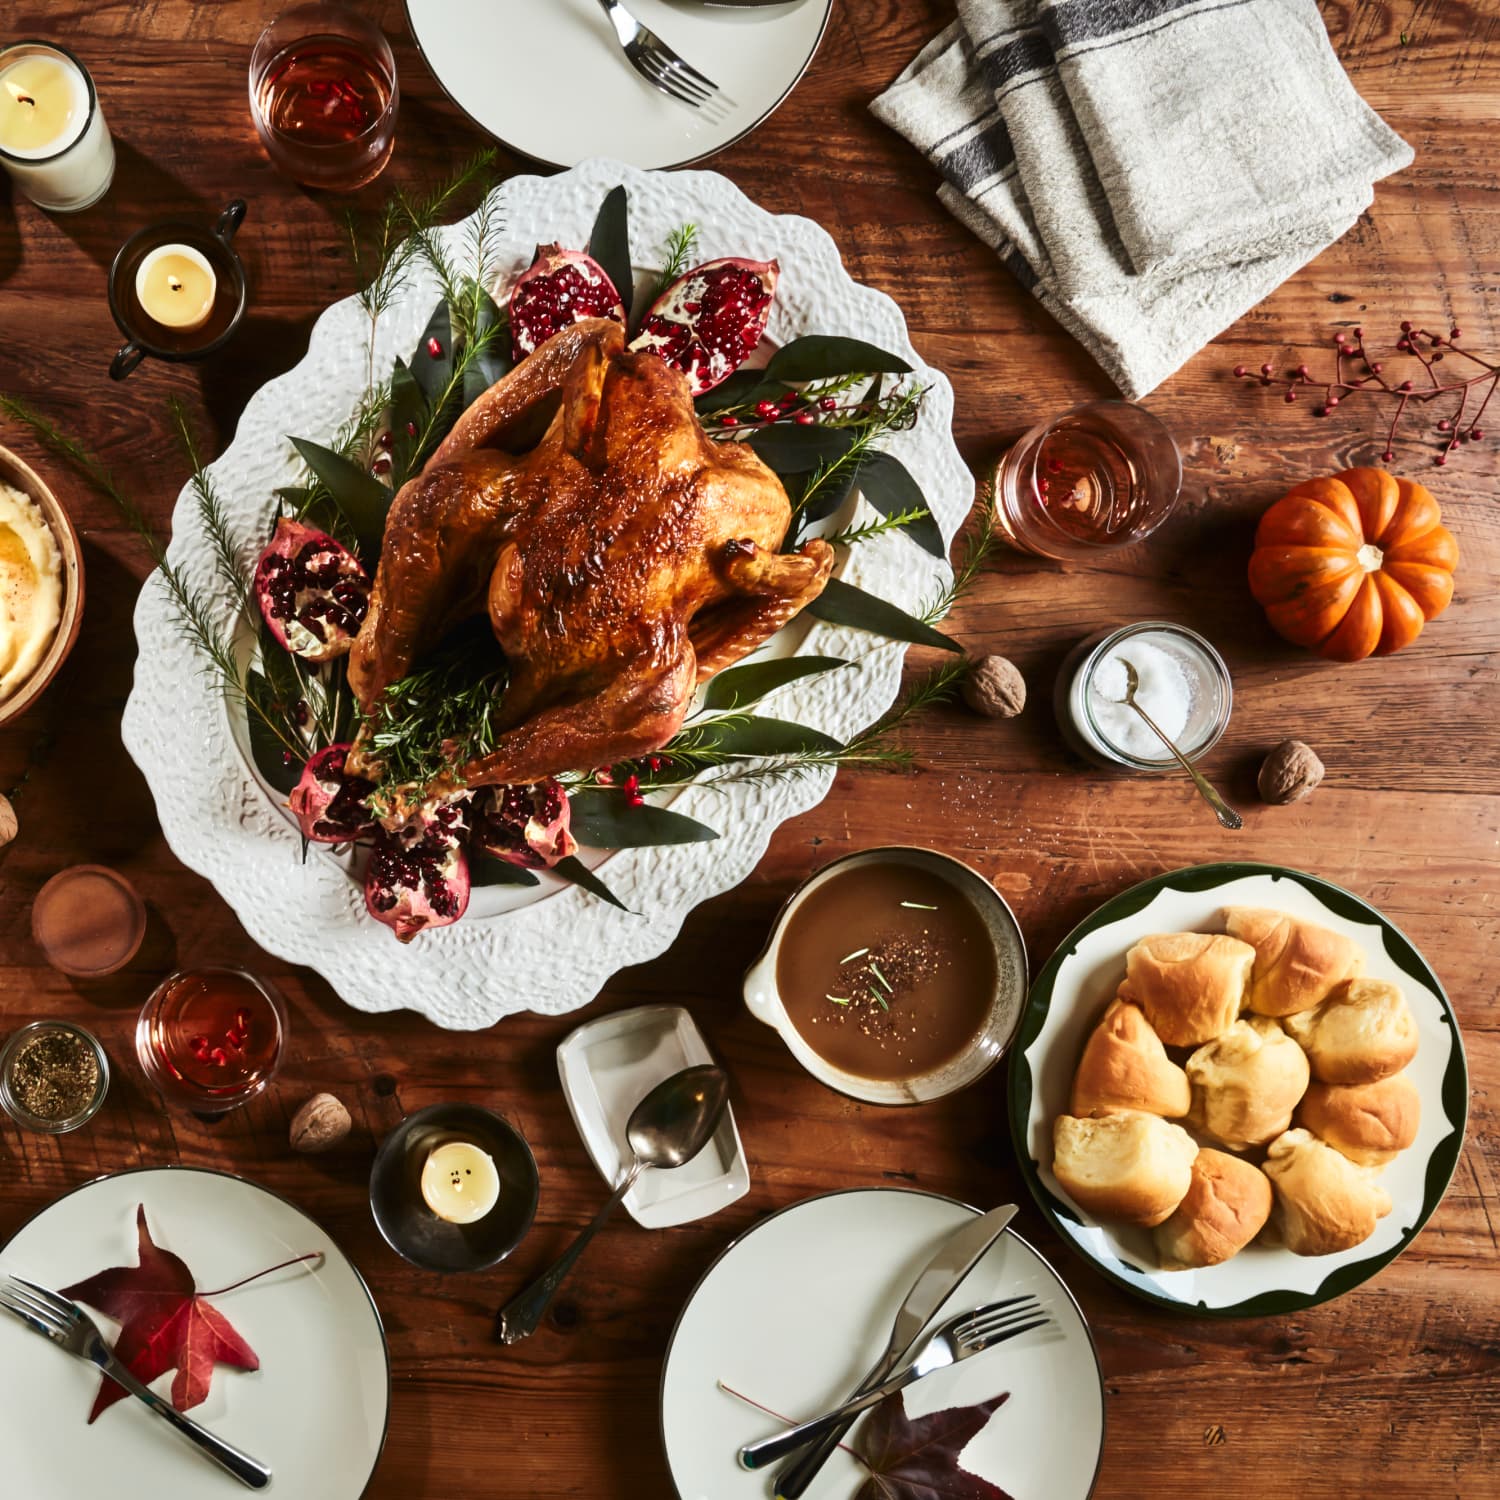 https://cdn.apartmenttherapy.info/image/upload/f_jpg,q_auto:eco,c_fill,g_auto,w_1500,ar_1:1/k%2FPhoto%2FIn-House%20Stock%2FThanksgiving%2FKitchn_Holiday_Table-2